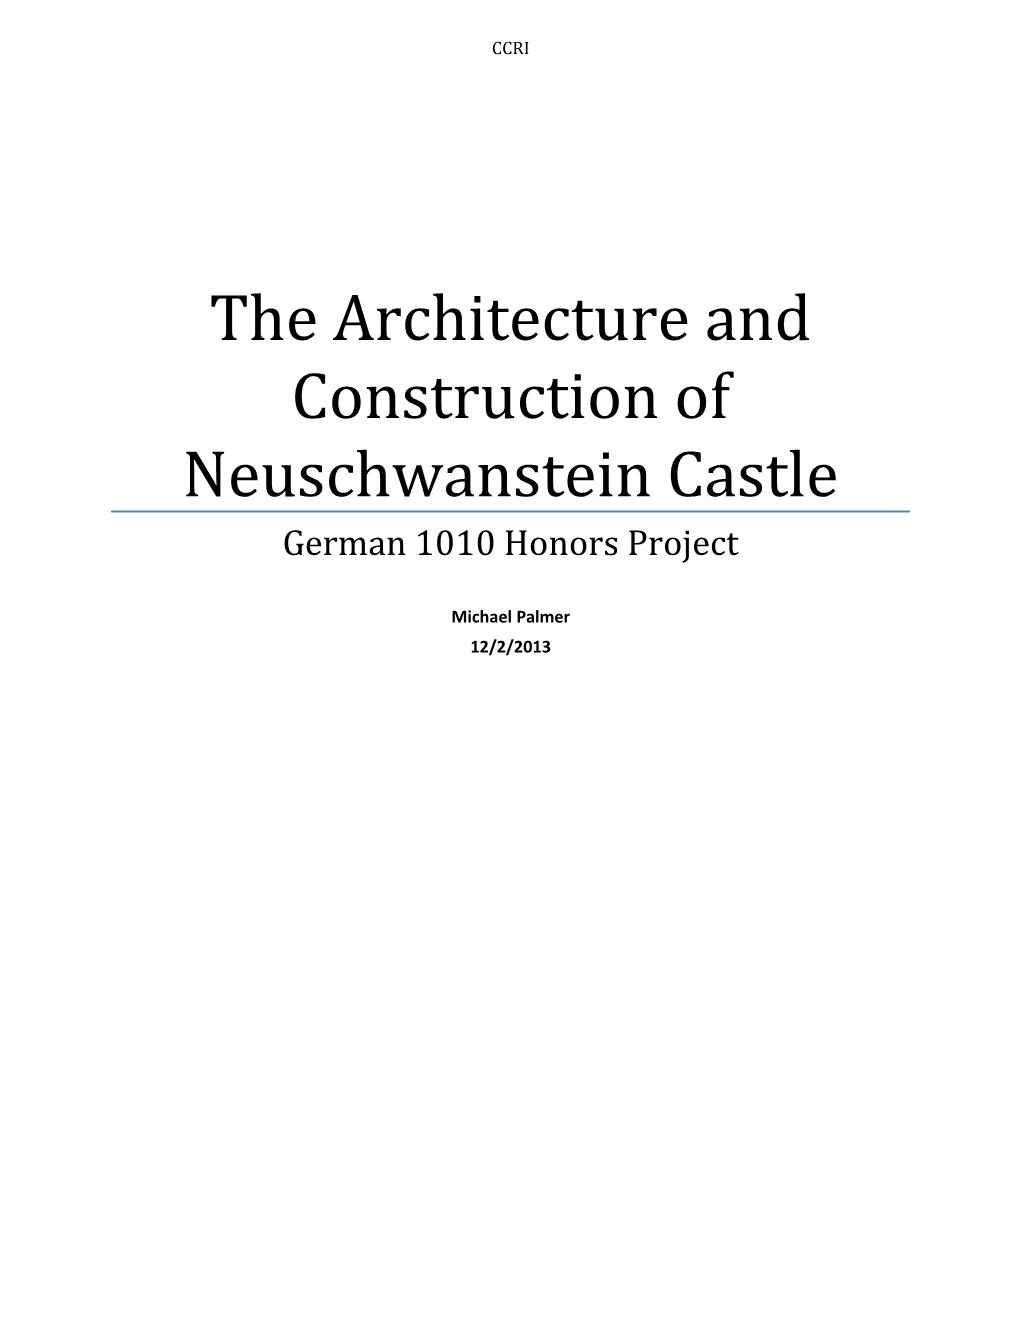 The Architecture And Construction Of Neuschwanstein Castle